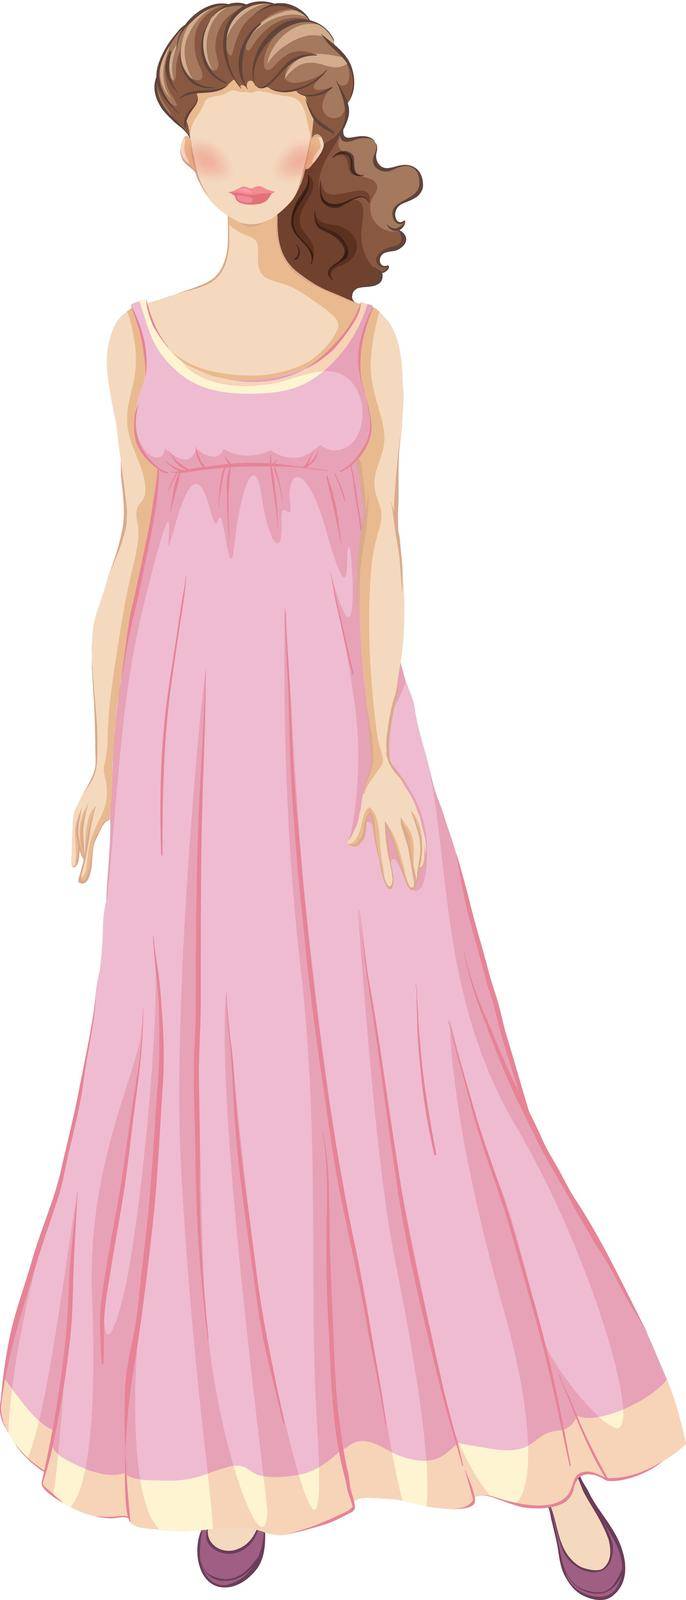 Sketch of a woman in long pink gown